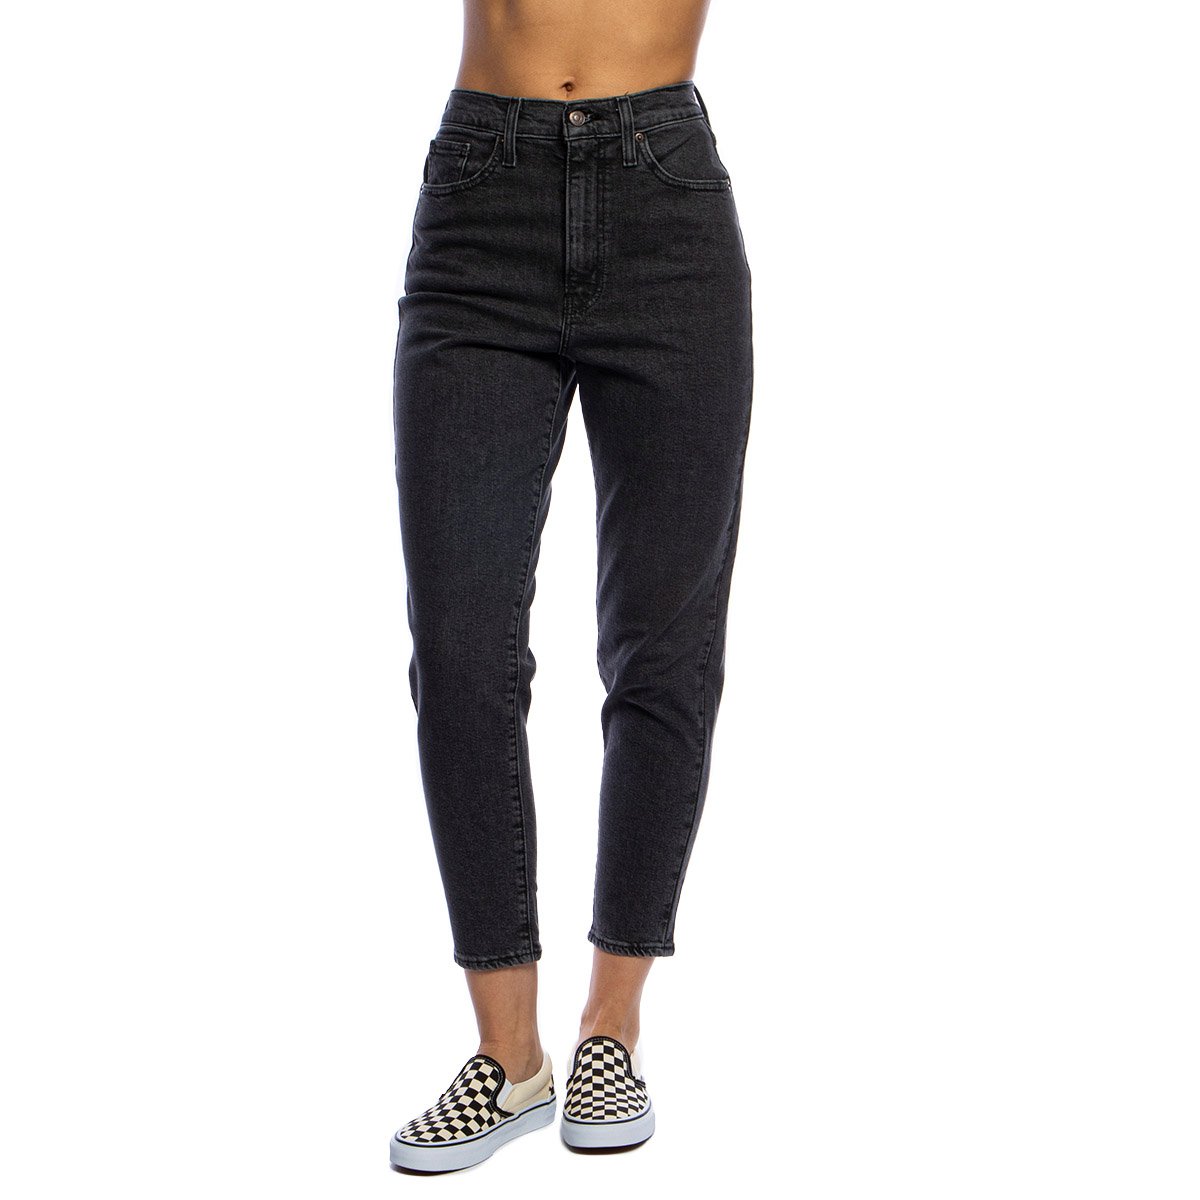 WMNS Jeans Pants Levi's High Waisted Mom Jeans washed grey 